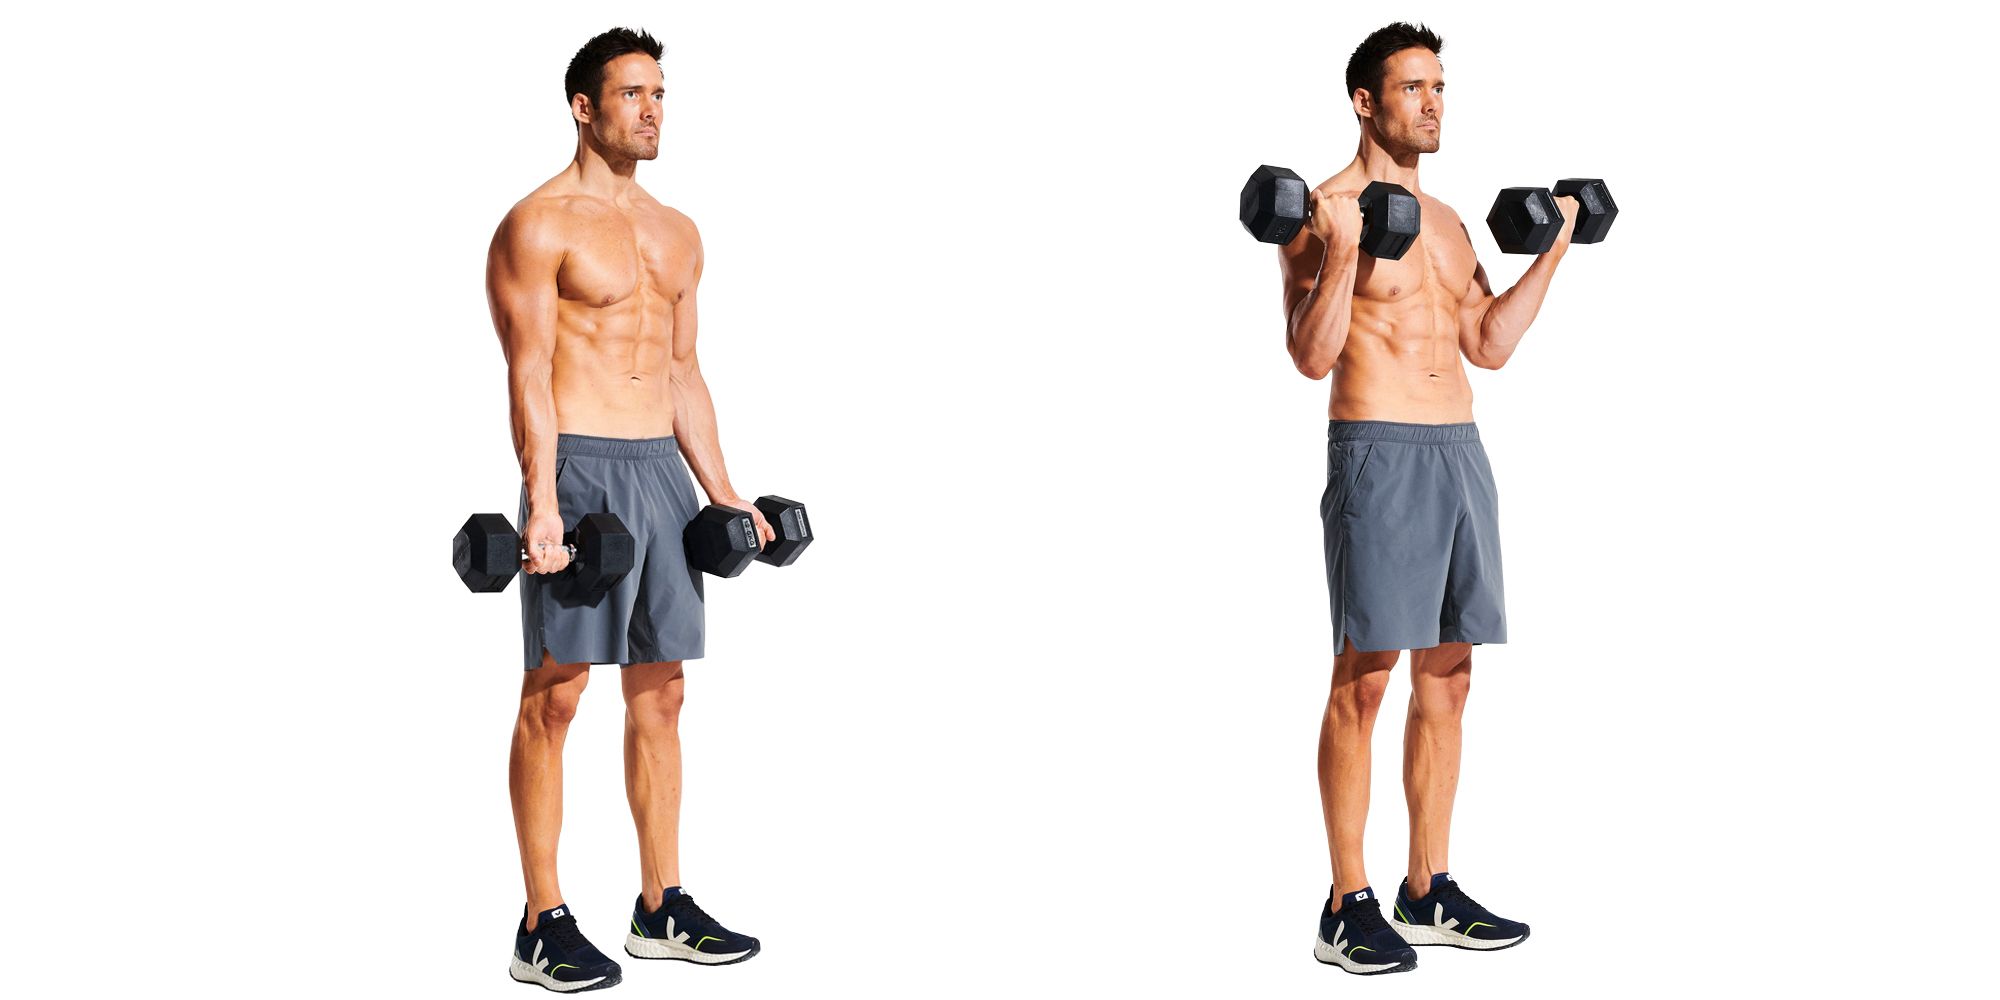 15-Minute Dumbbell Arm Workout for Bigger Biceps and Triceps